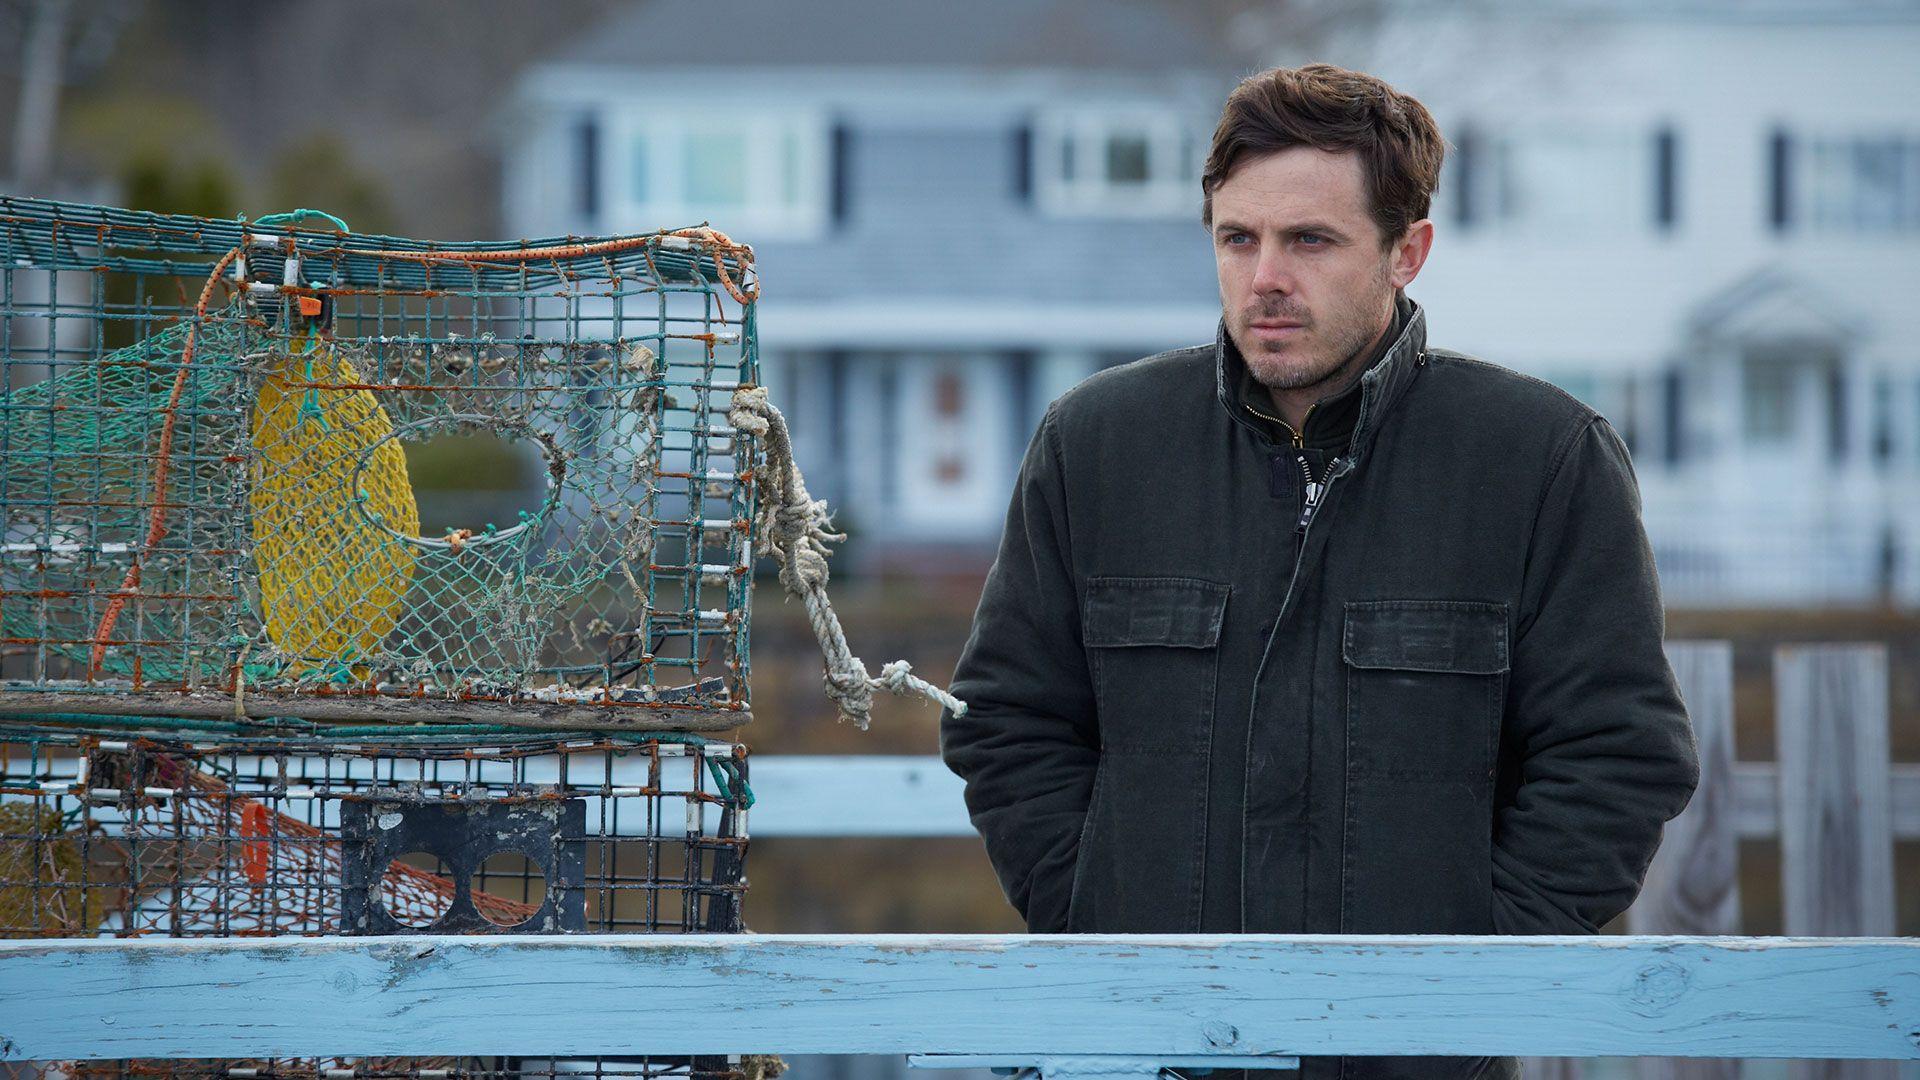 Manchester by the Sea. Movie Site. February 2017